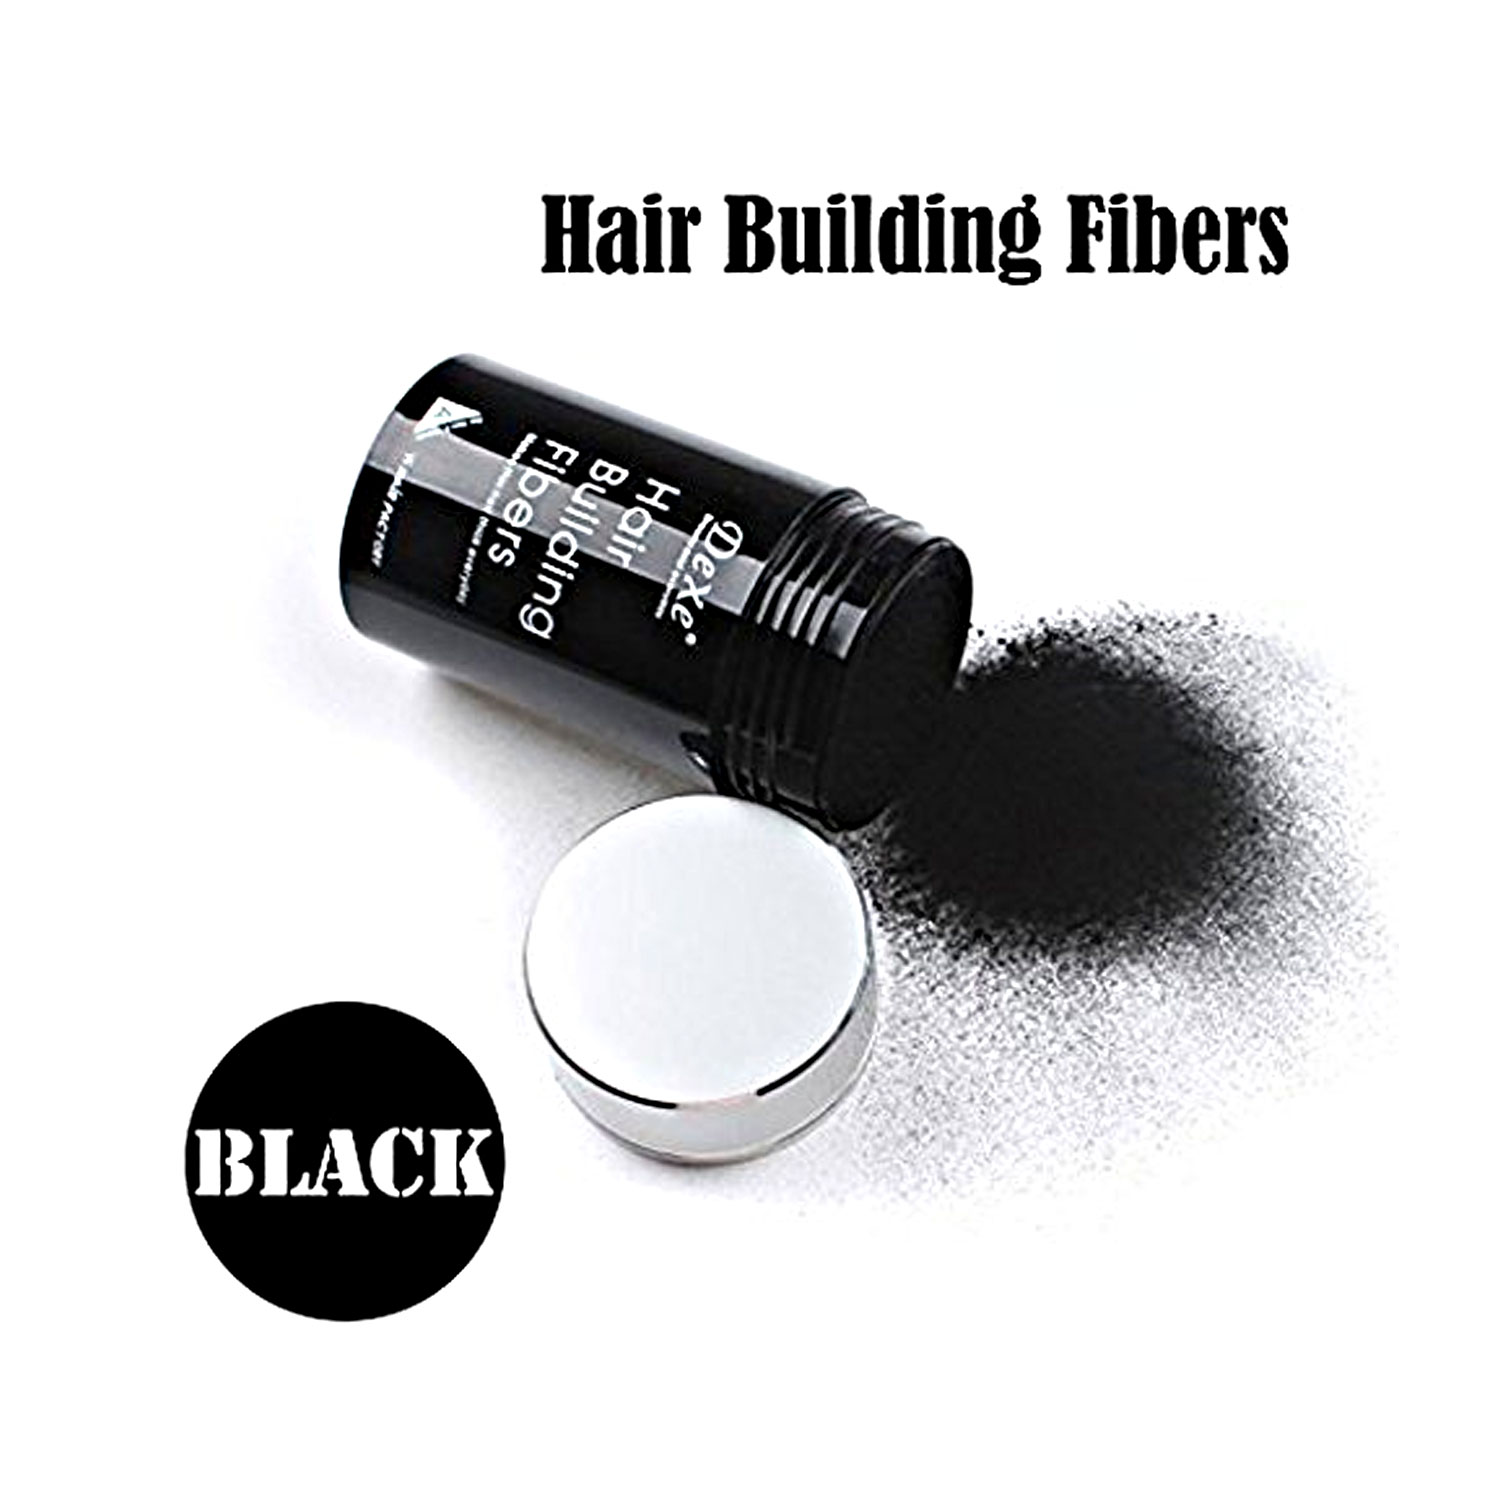 What Are Hair Fibers How To Use And Side Effects